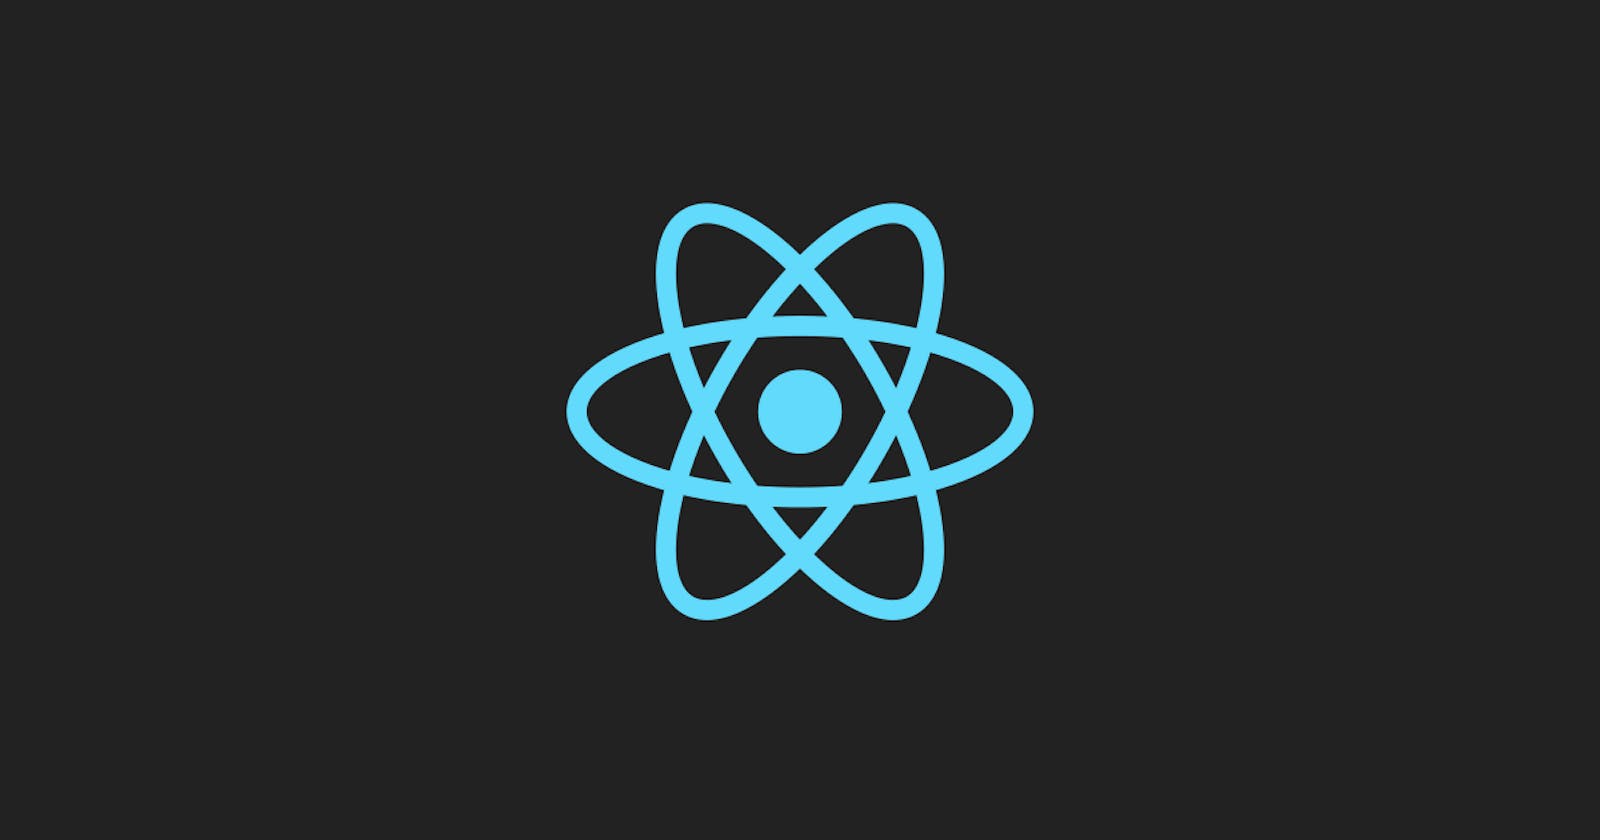 Text Typing Effect Using React